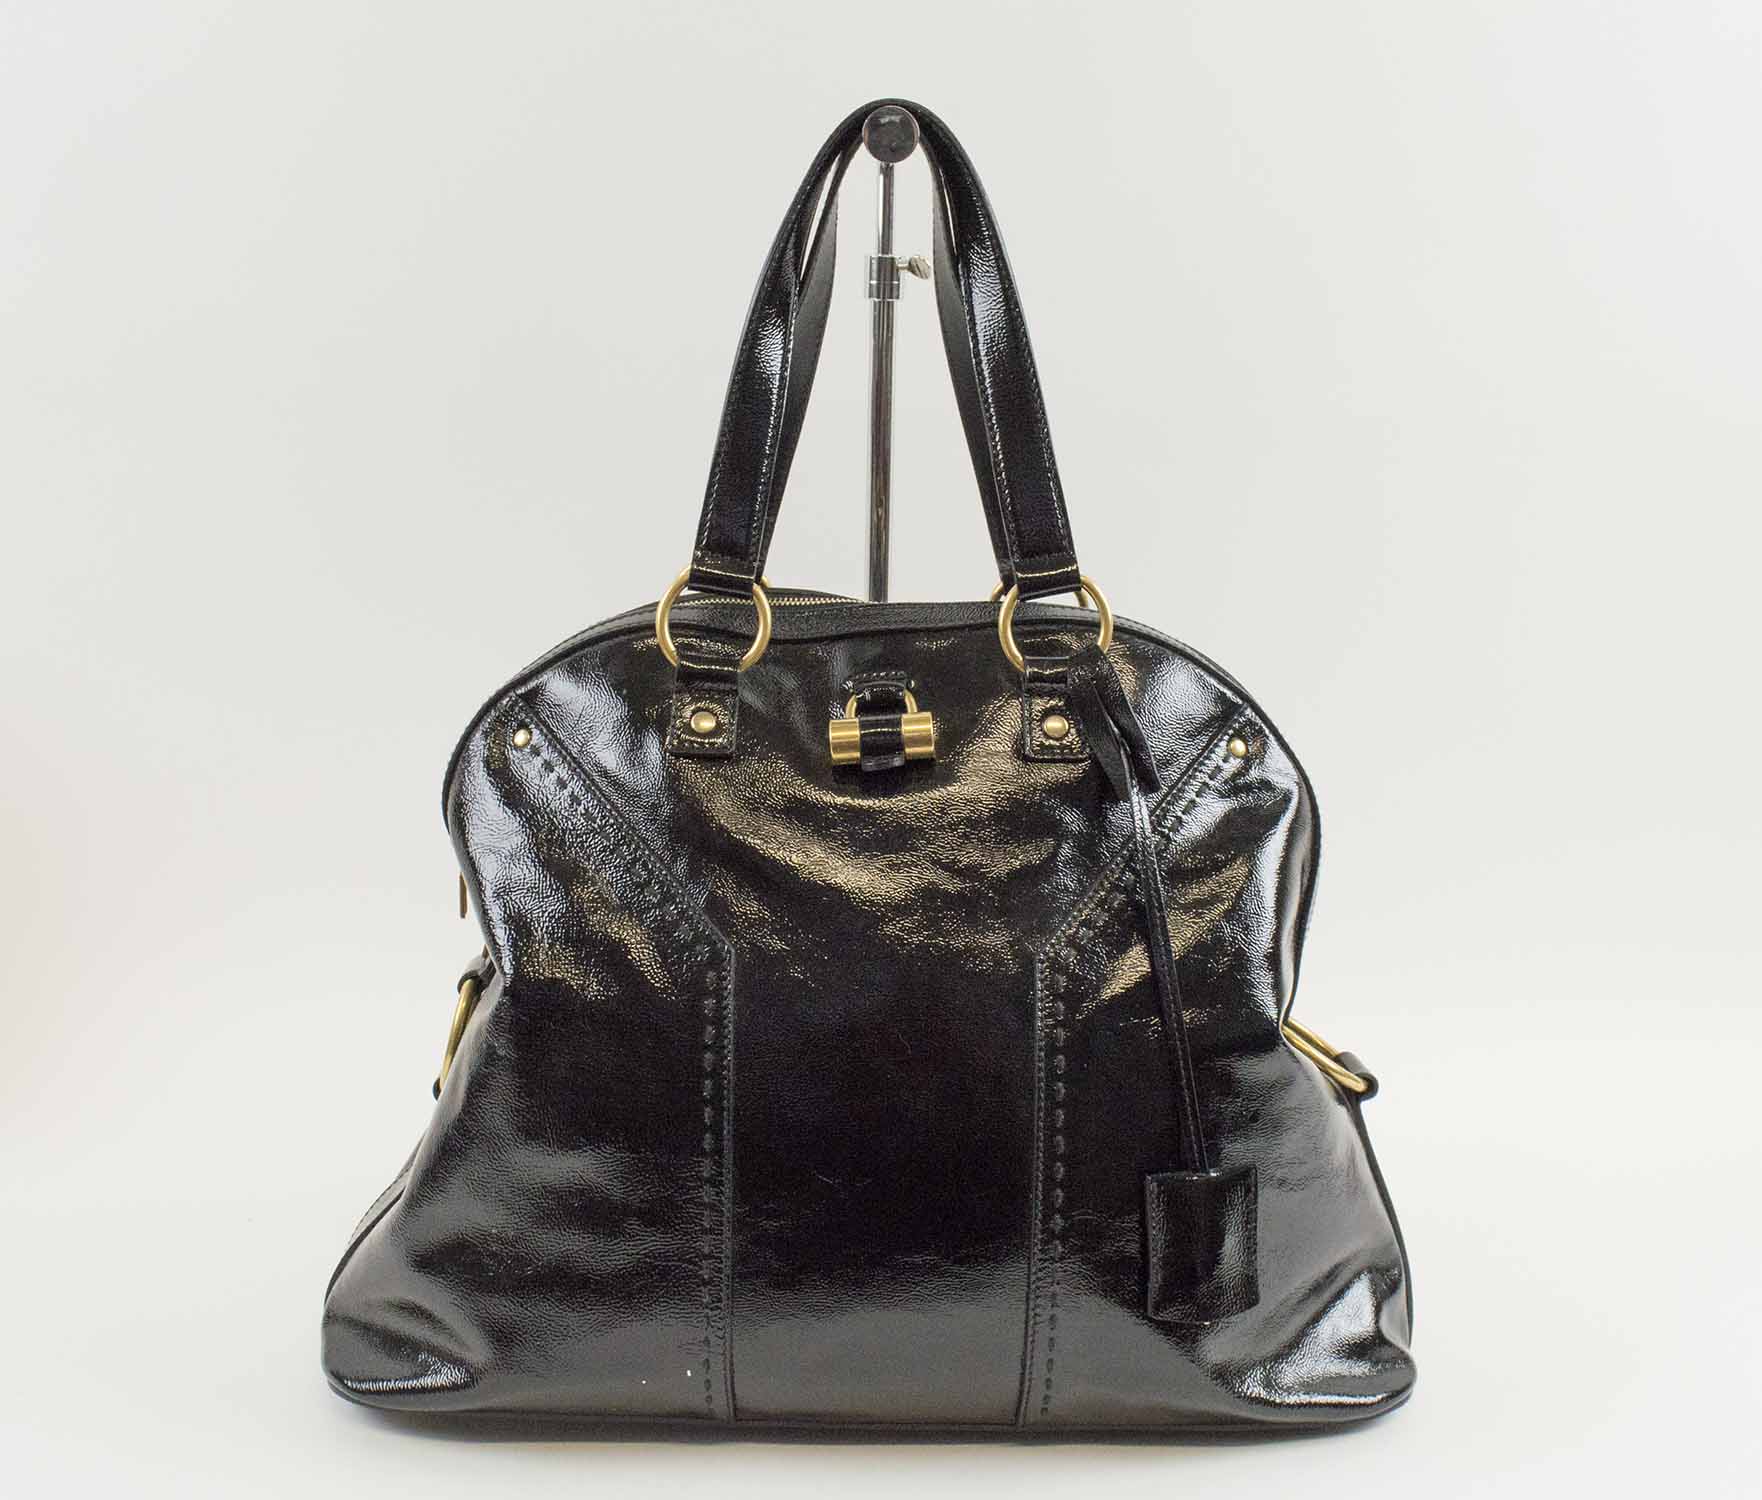 MULBERRY DARIA SATCHEL, black leather with gold tone hardware and iconic  logo at the front, detachable braided shoulder strap, front snap closure,  with dust bag, 33cm x 25cm H.